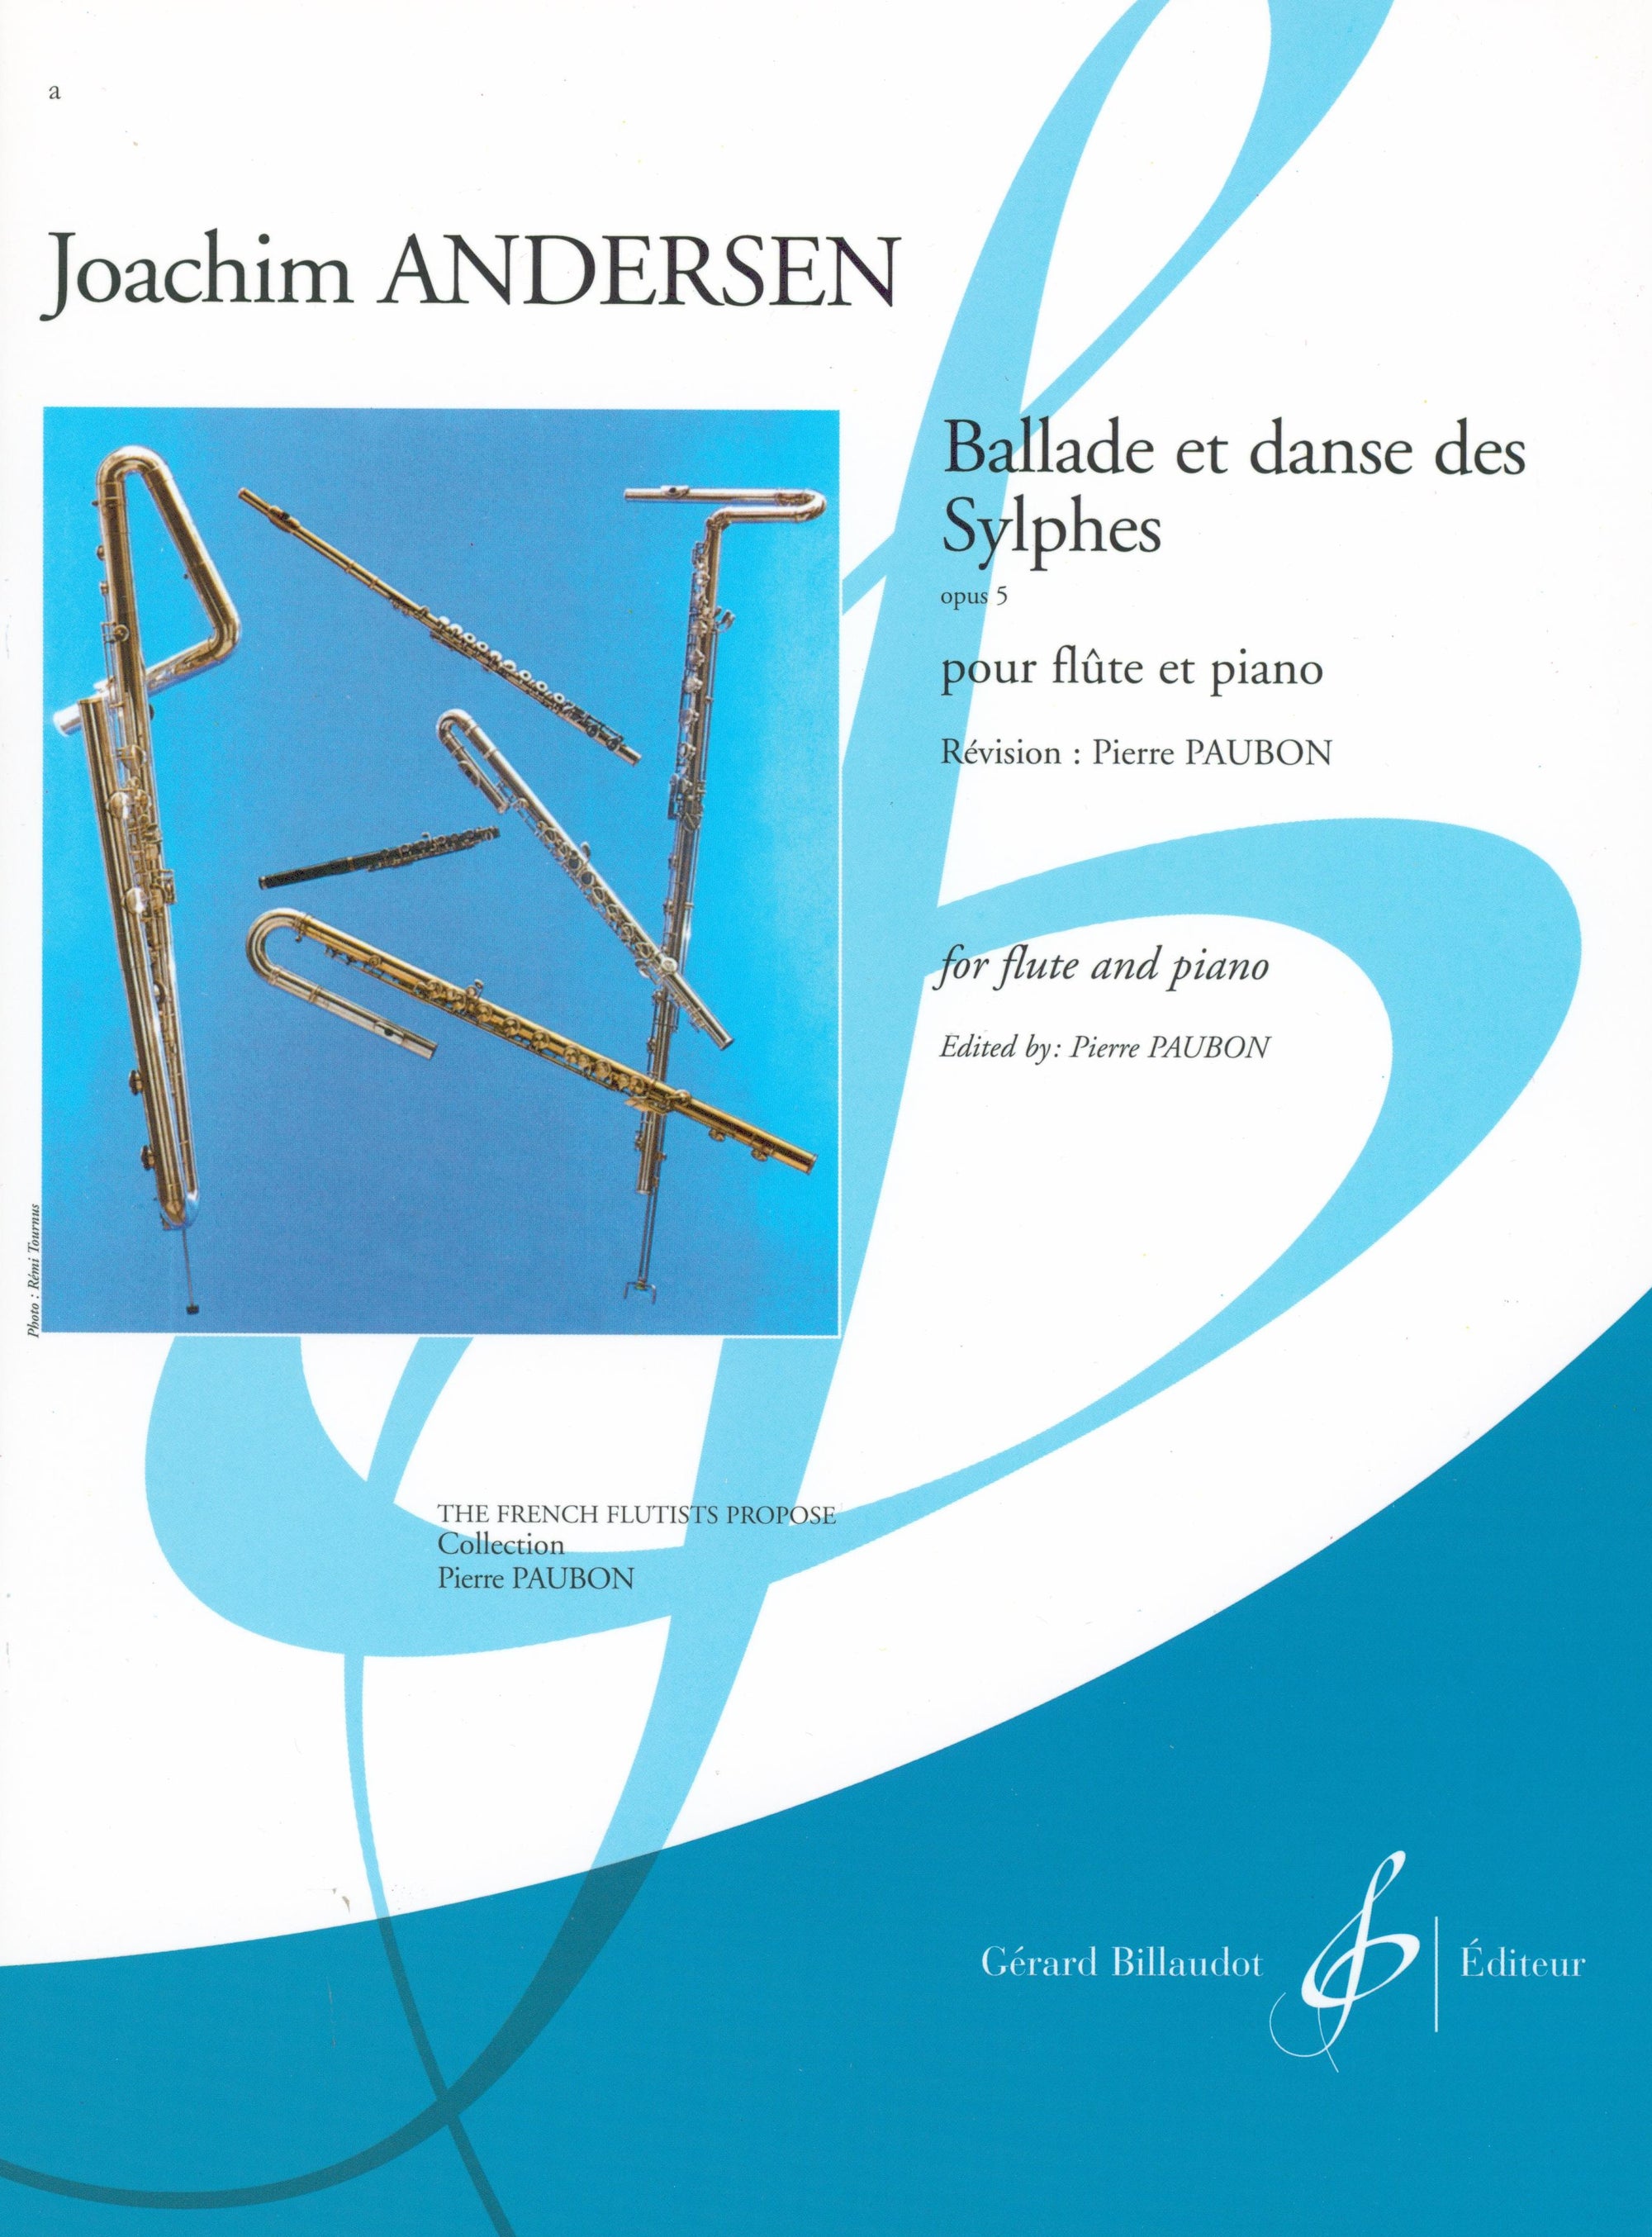 Andersen: Ballad and Dance of the Sylphs, Op. 5 (arr. for flute & piano)